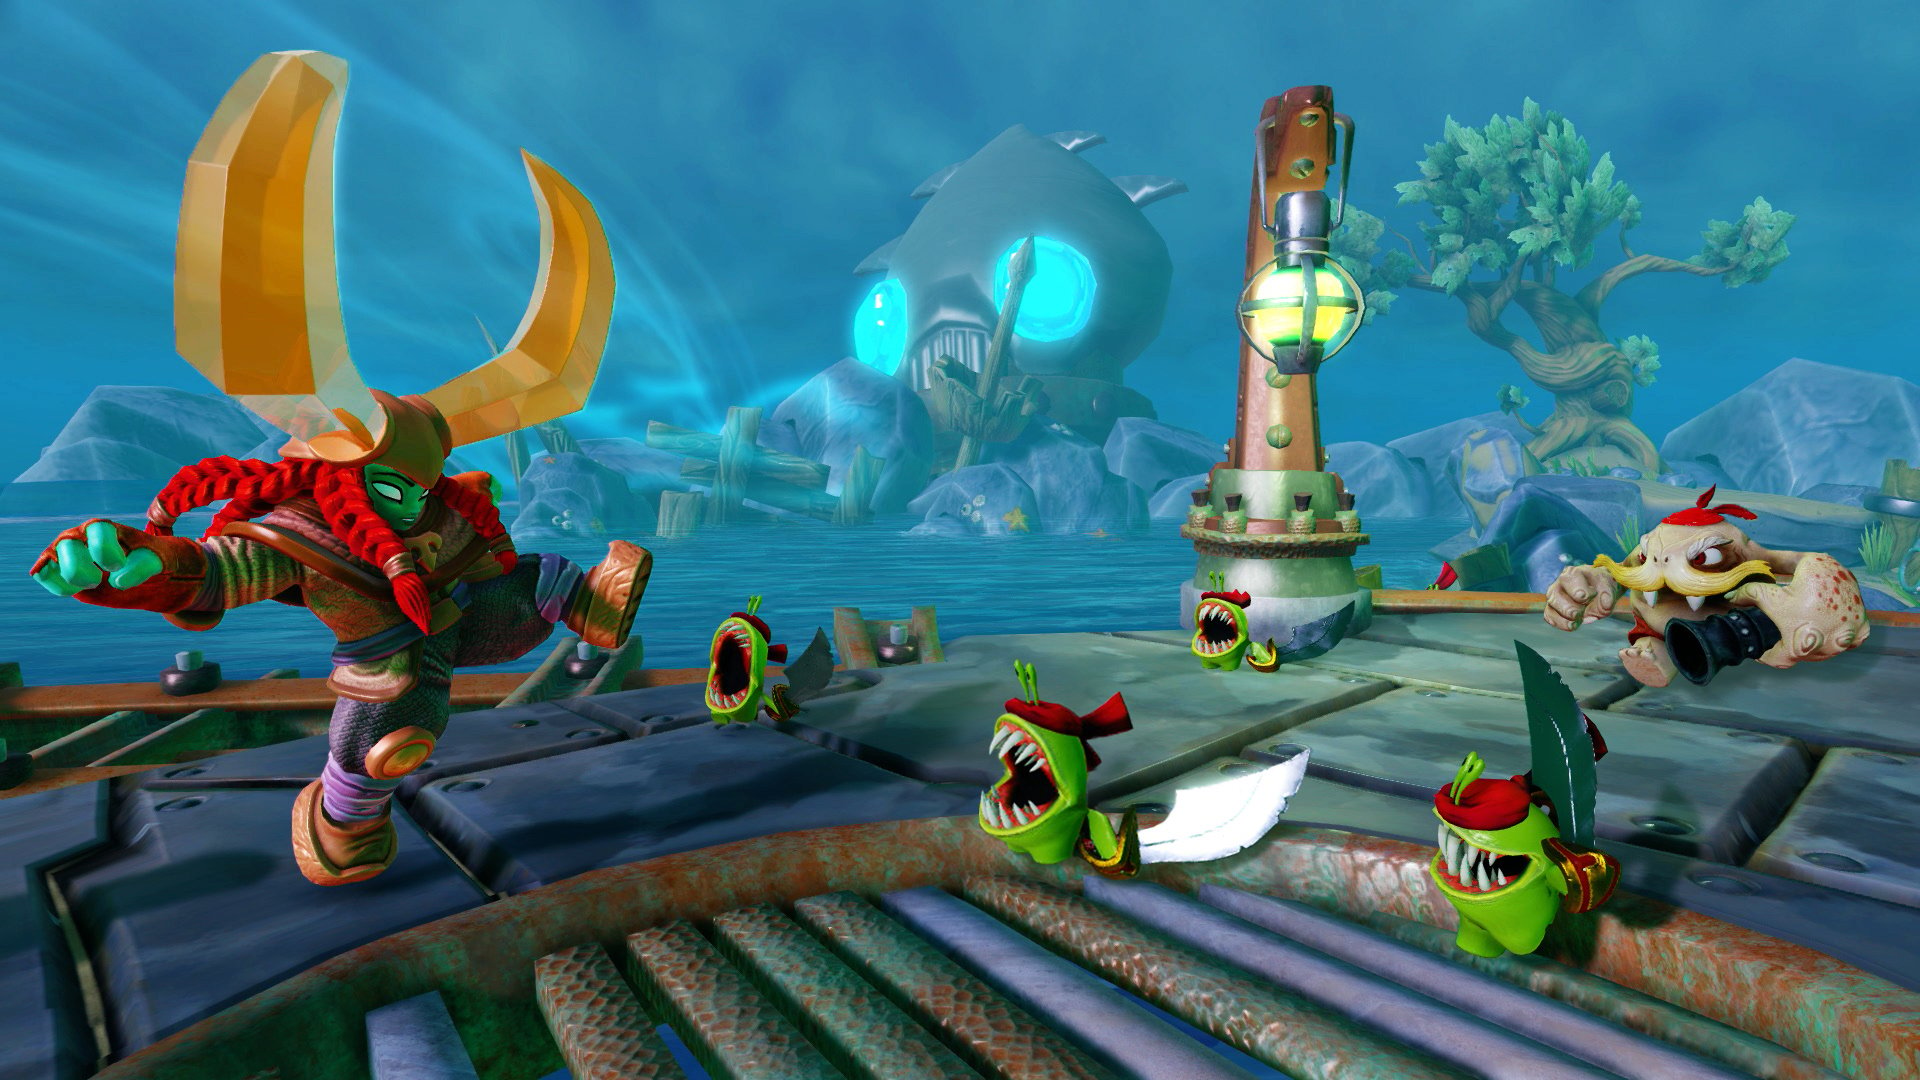 Skylanders trap team-068 torrent machito his orchestra discography torrent